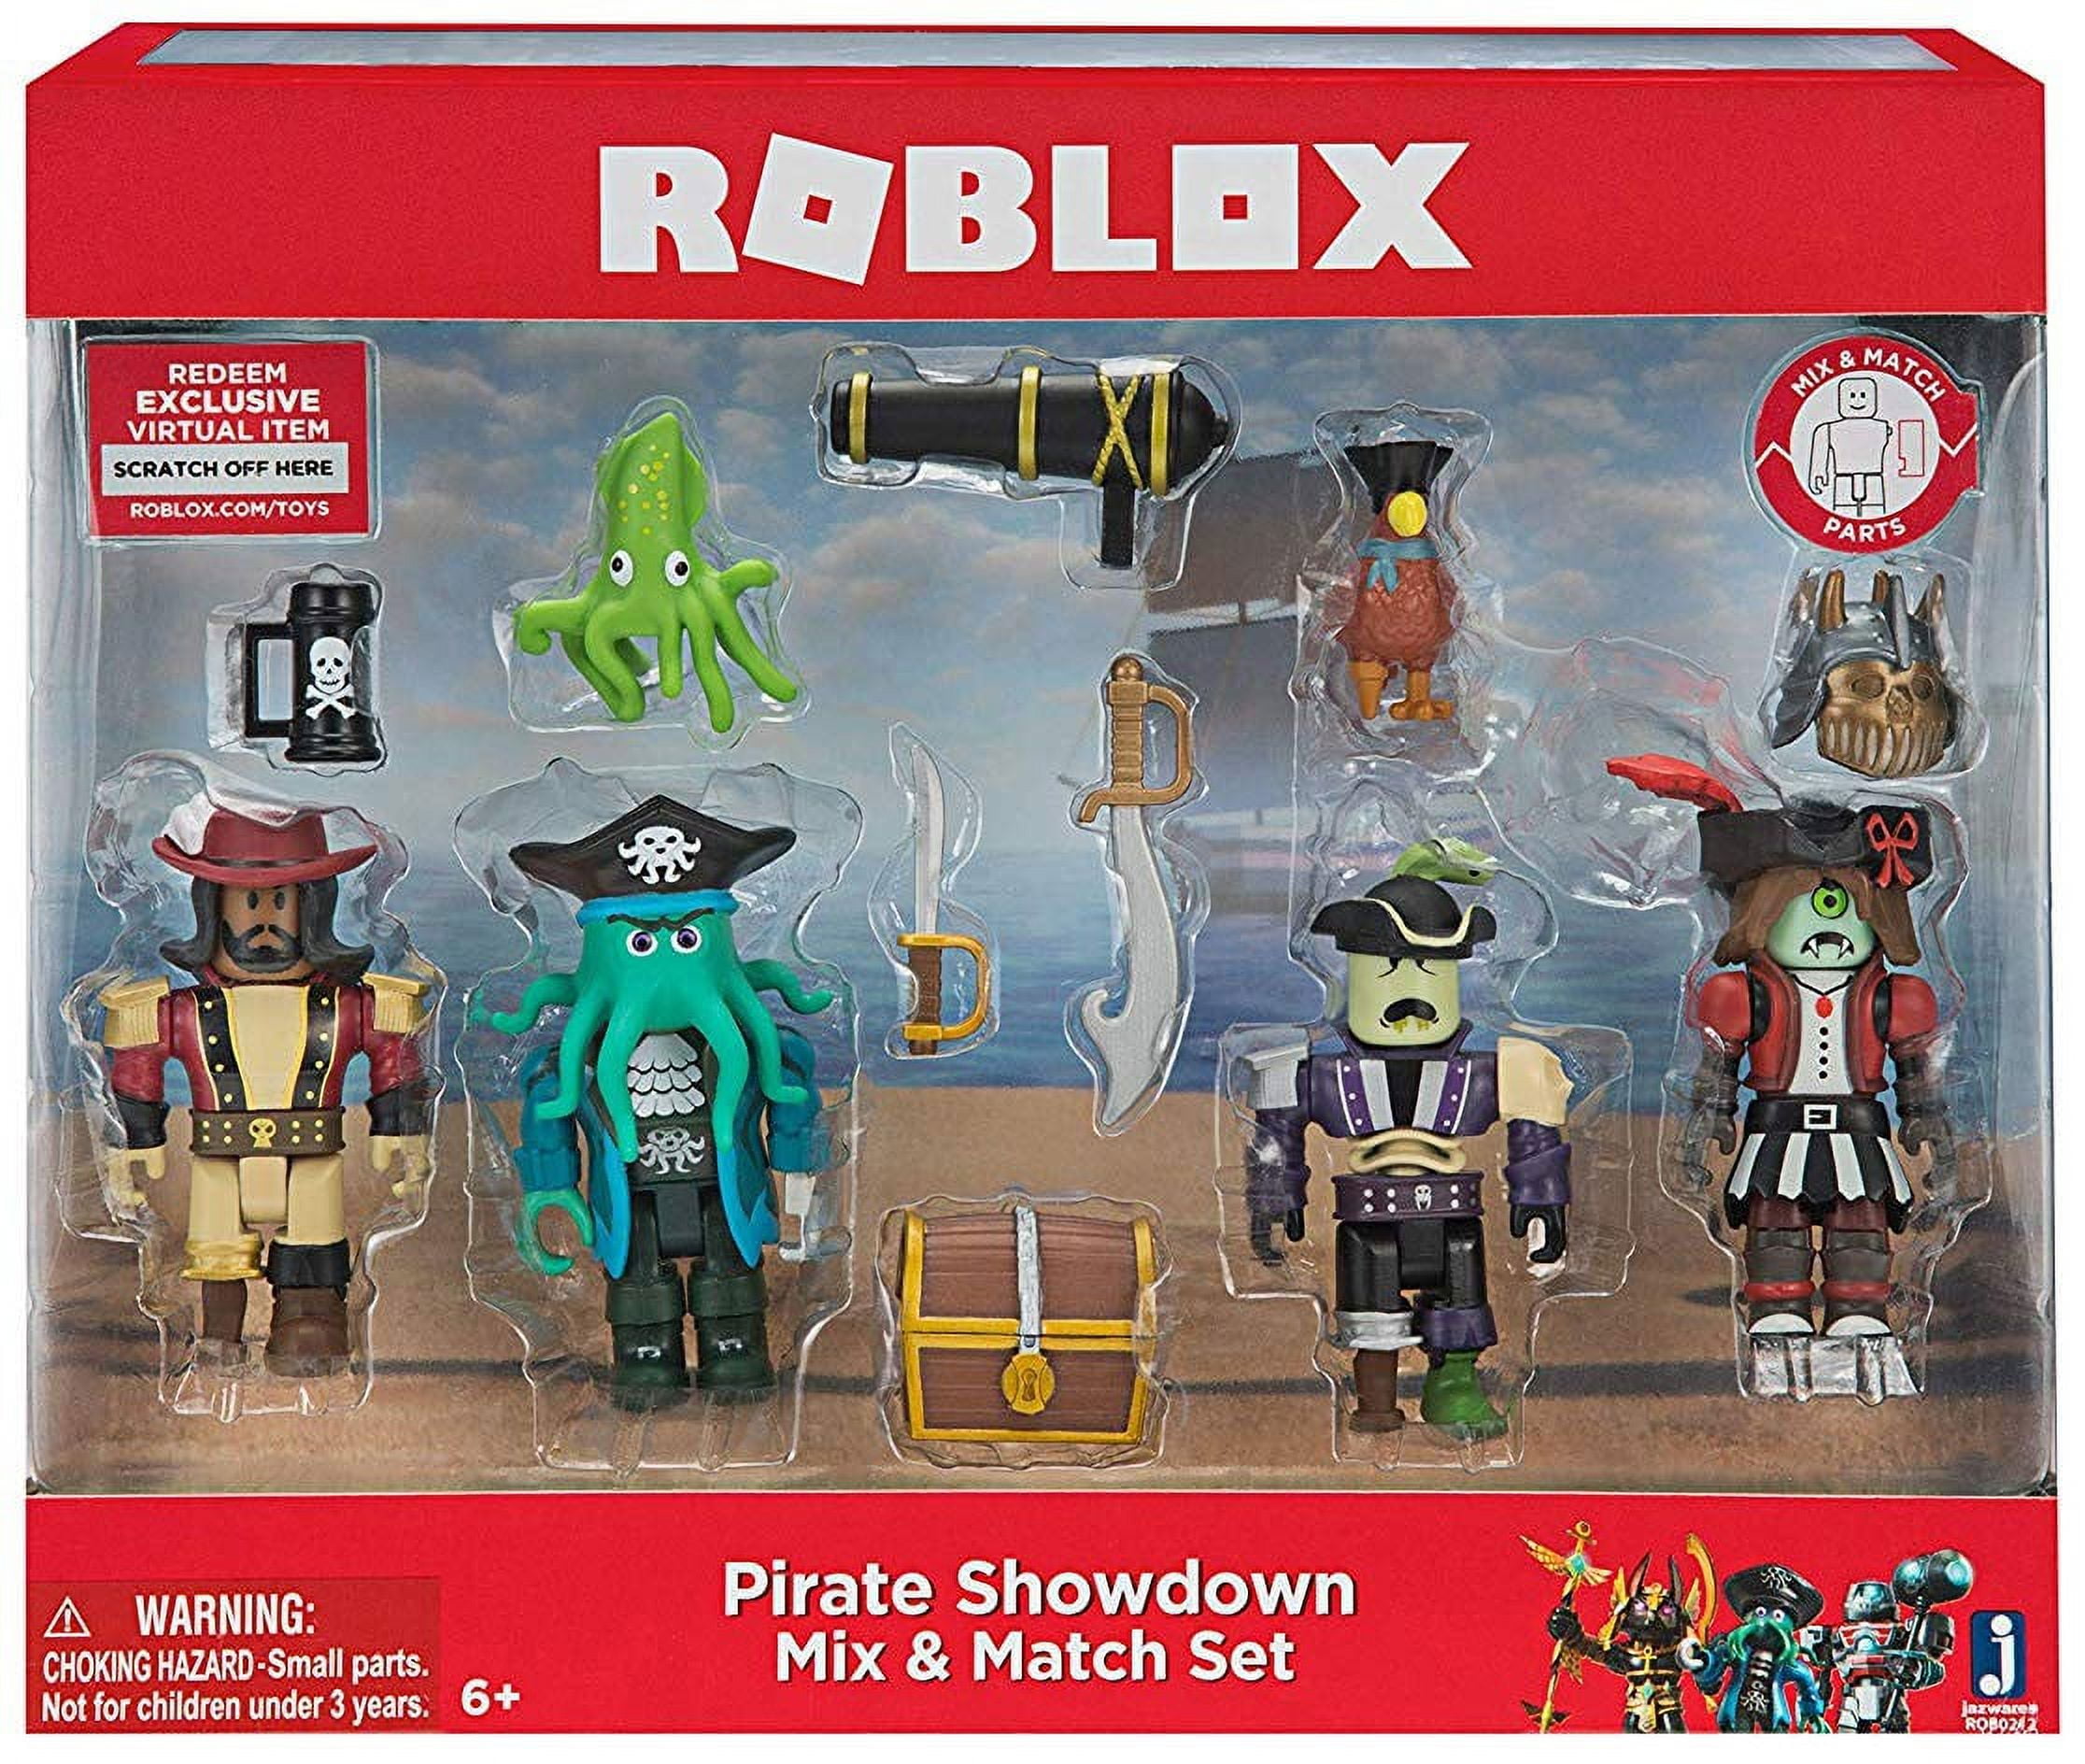 ROBLOX Pirates Showdown 12 Pieces with Virtual Item Code New MISB